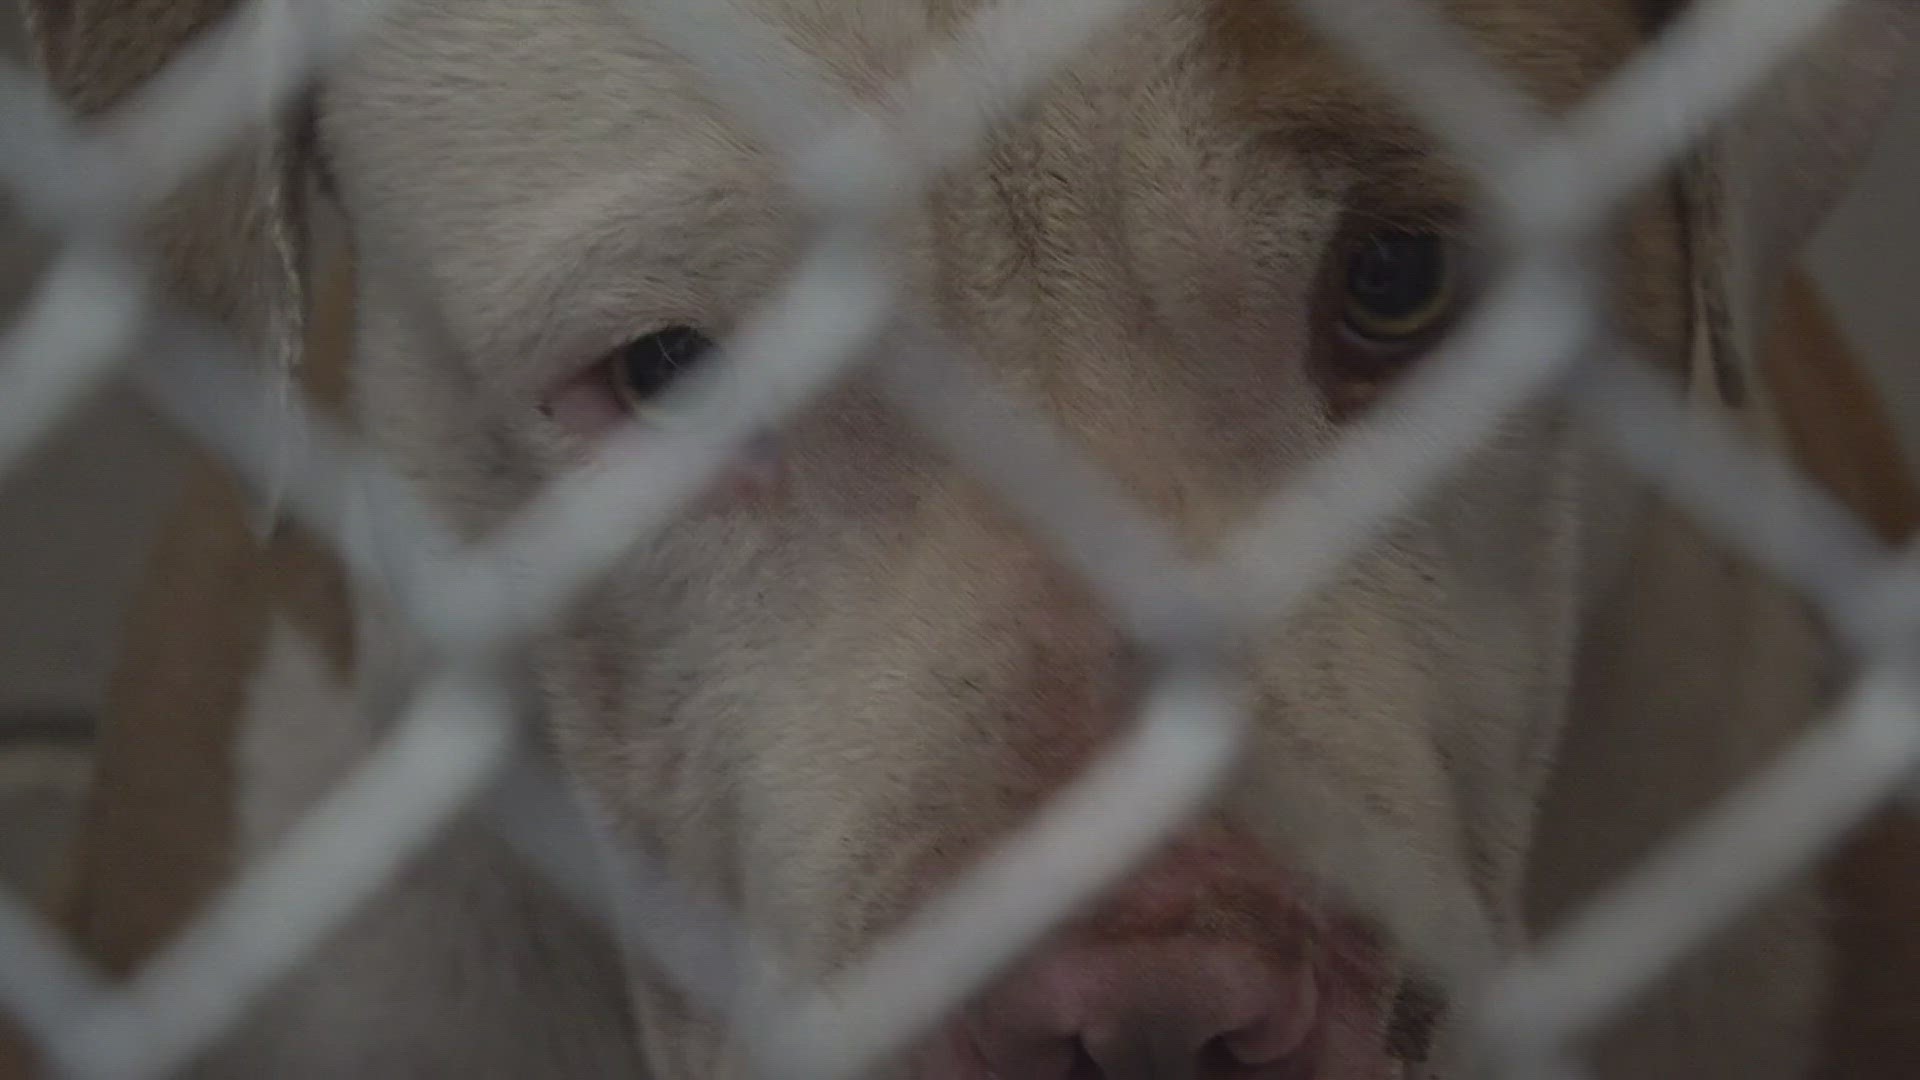 The surviving dog will remain in Beaumont Animal Care custody for a 10-day rabies quarantine.